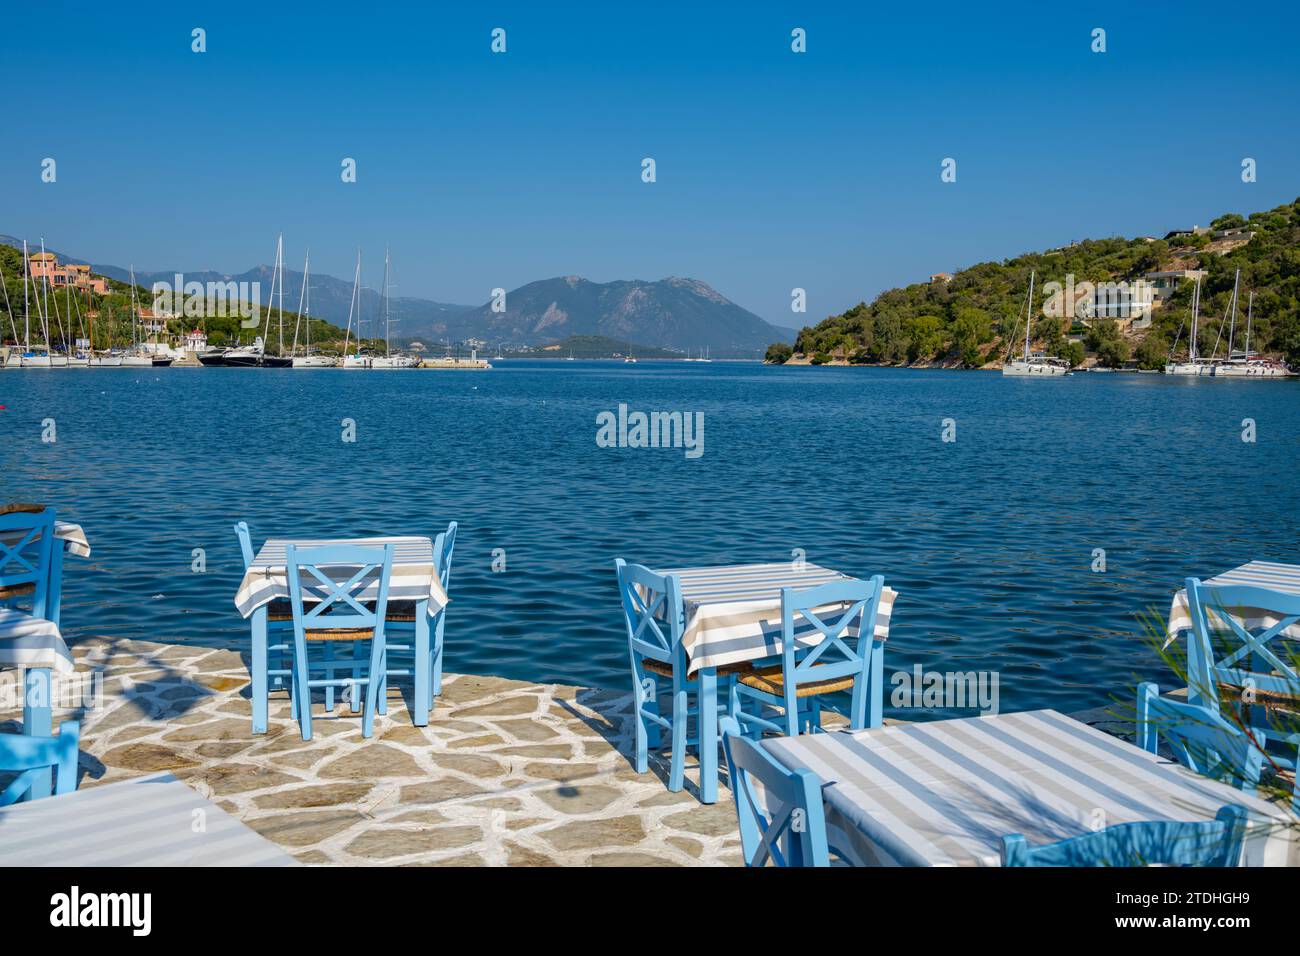 Yachts moored in the harbour of Vathi on the island of Meganisi in the Ionian Sea Stock Photo